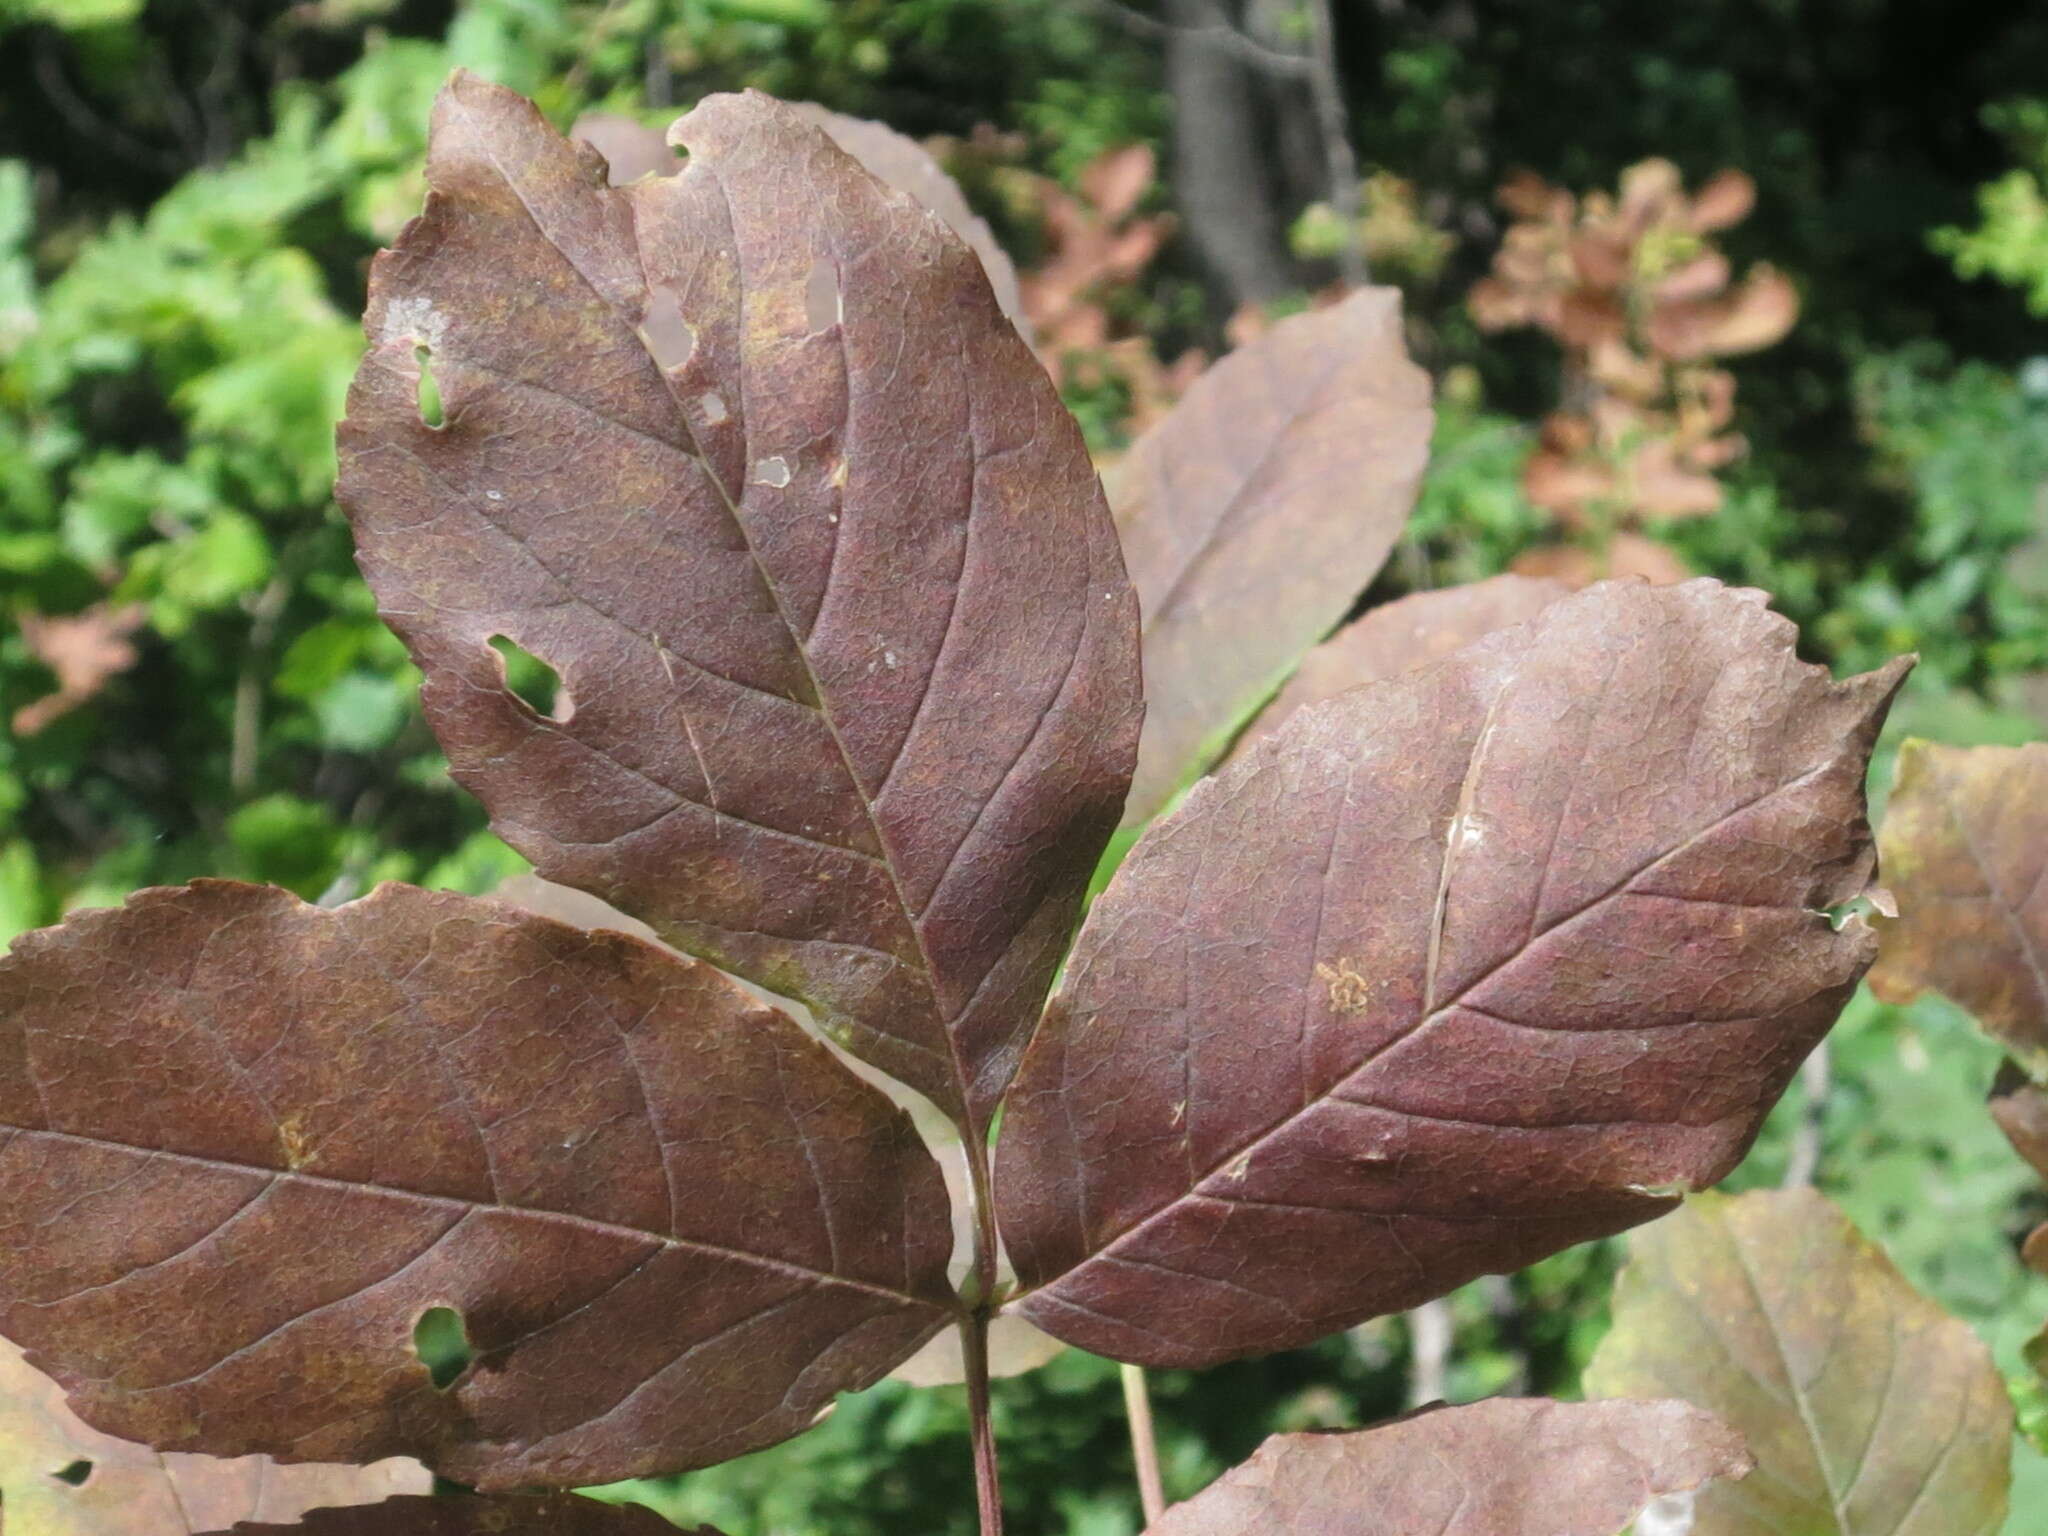 Image of Fraxinus chinensis subsp. rhynchophylla (Hance) A. E. Murray